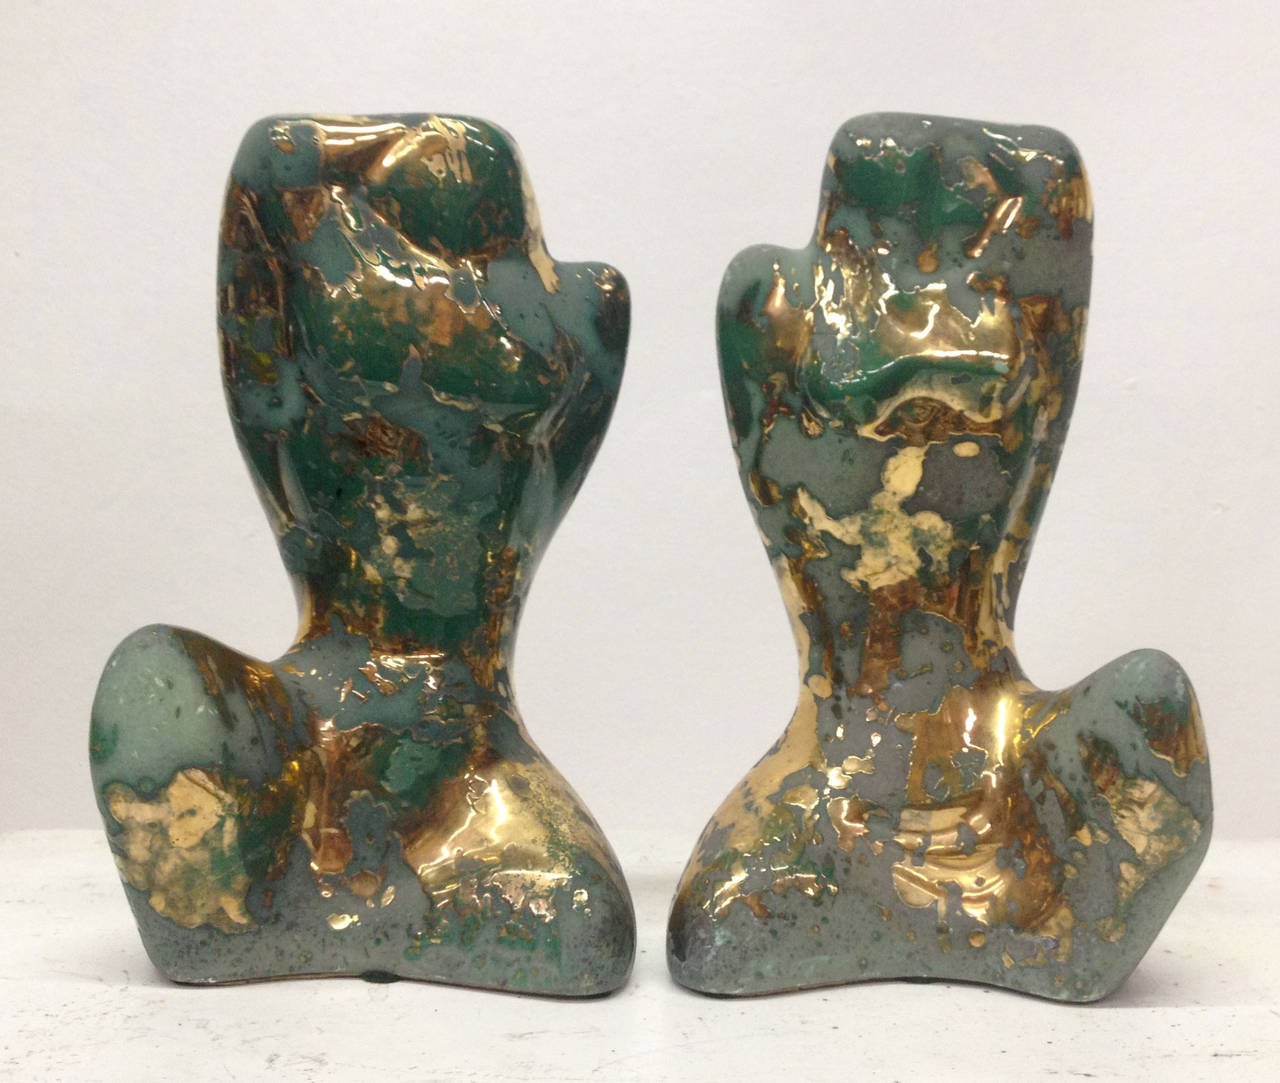 Gilded and Oxidized Man and Woman Sculptures 1